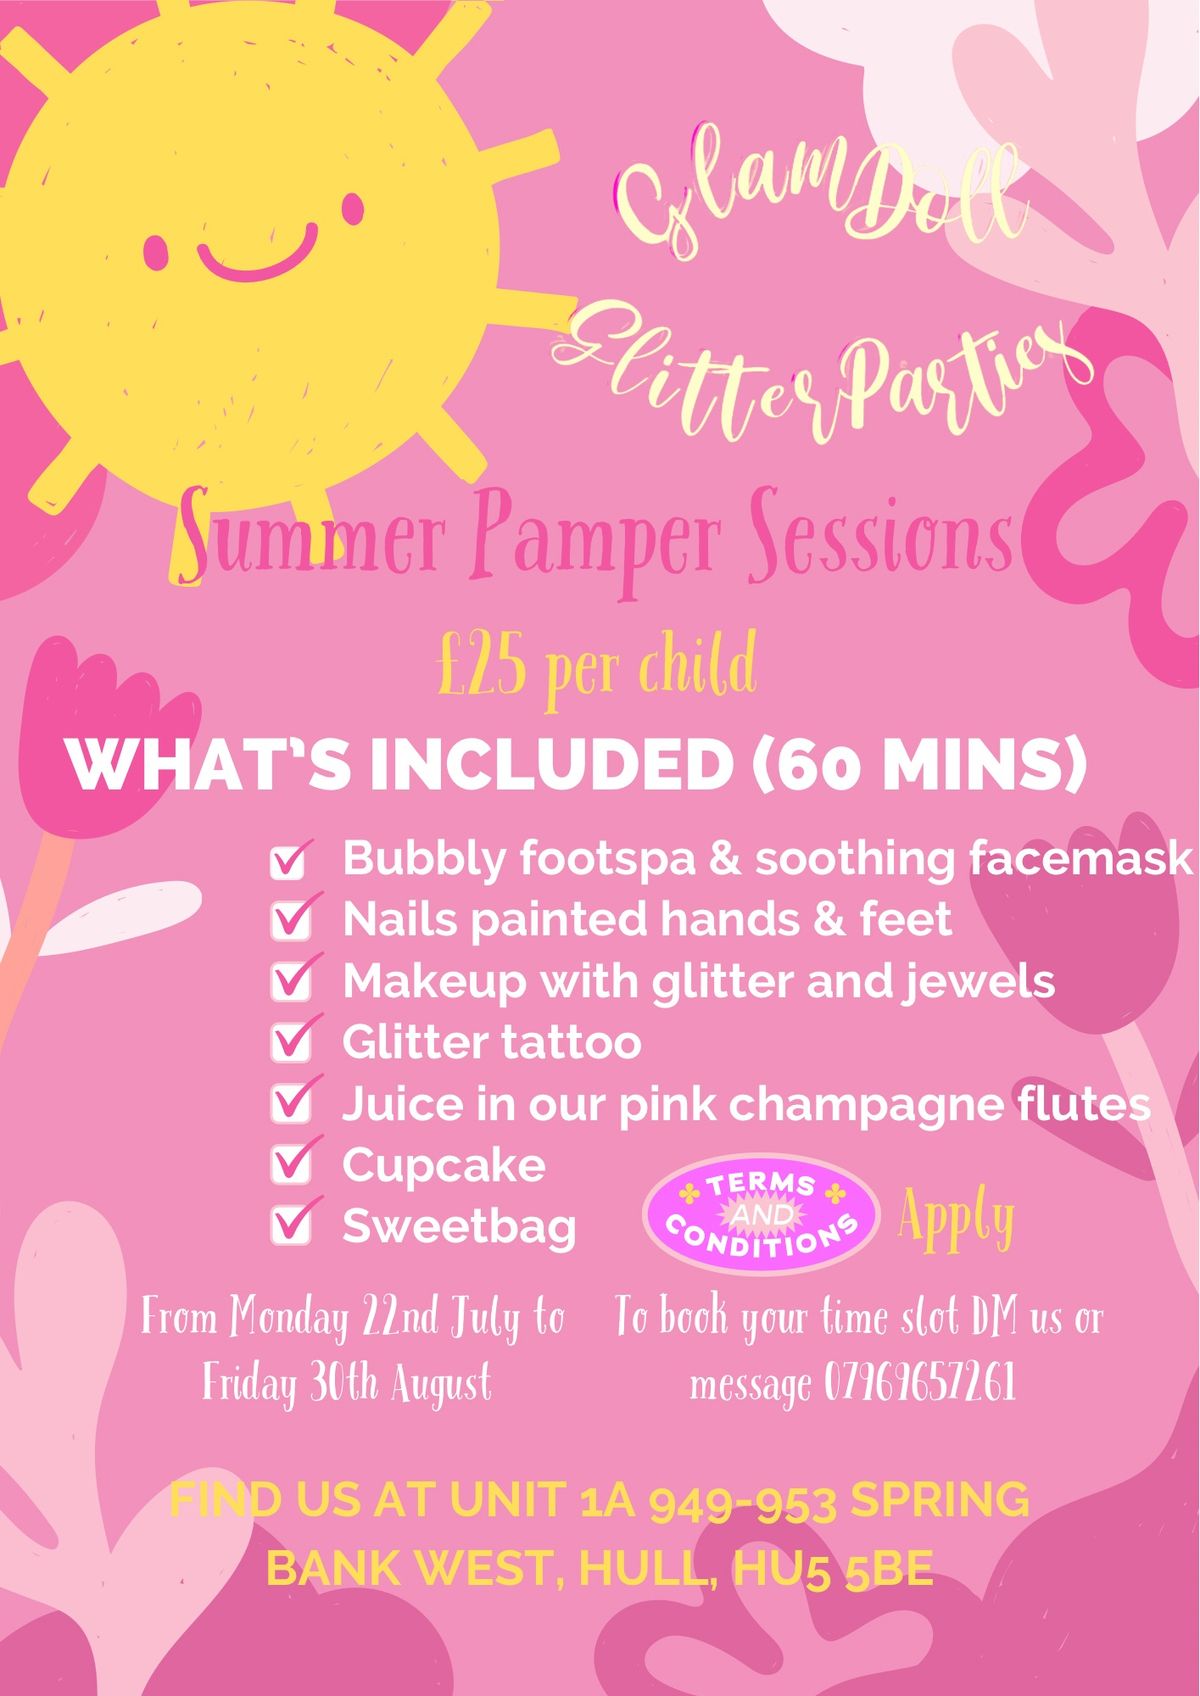 Glam Doll Summer Pamper Sessions